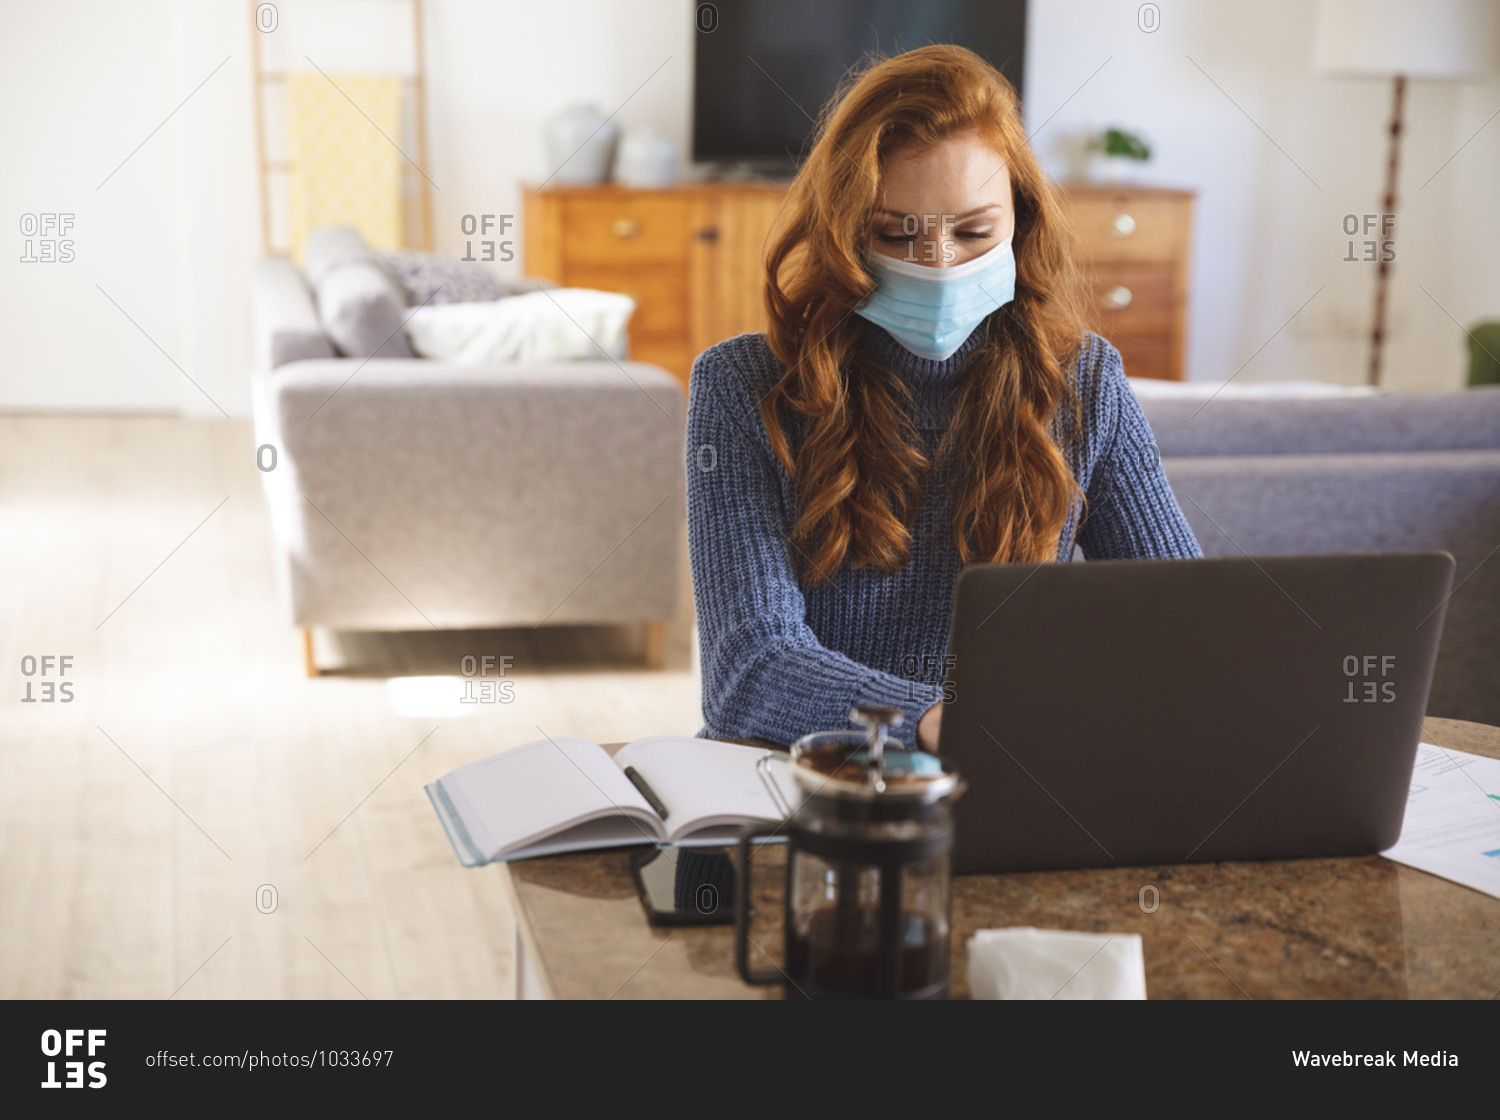 Caucasian woman spending time at home, in the kitchen, working from home, using her laptop,  wearing a face mask. Social distancing during Covid 19 Coronavirus quarantine lockdown.